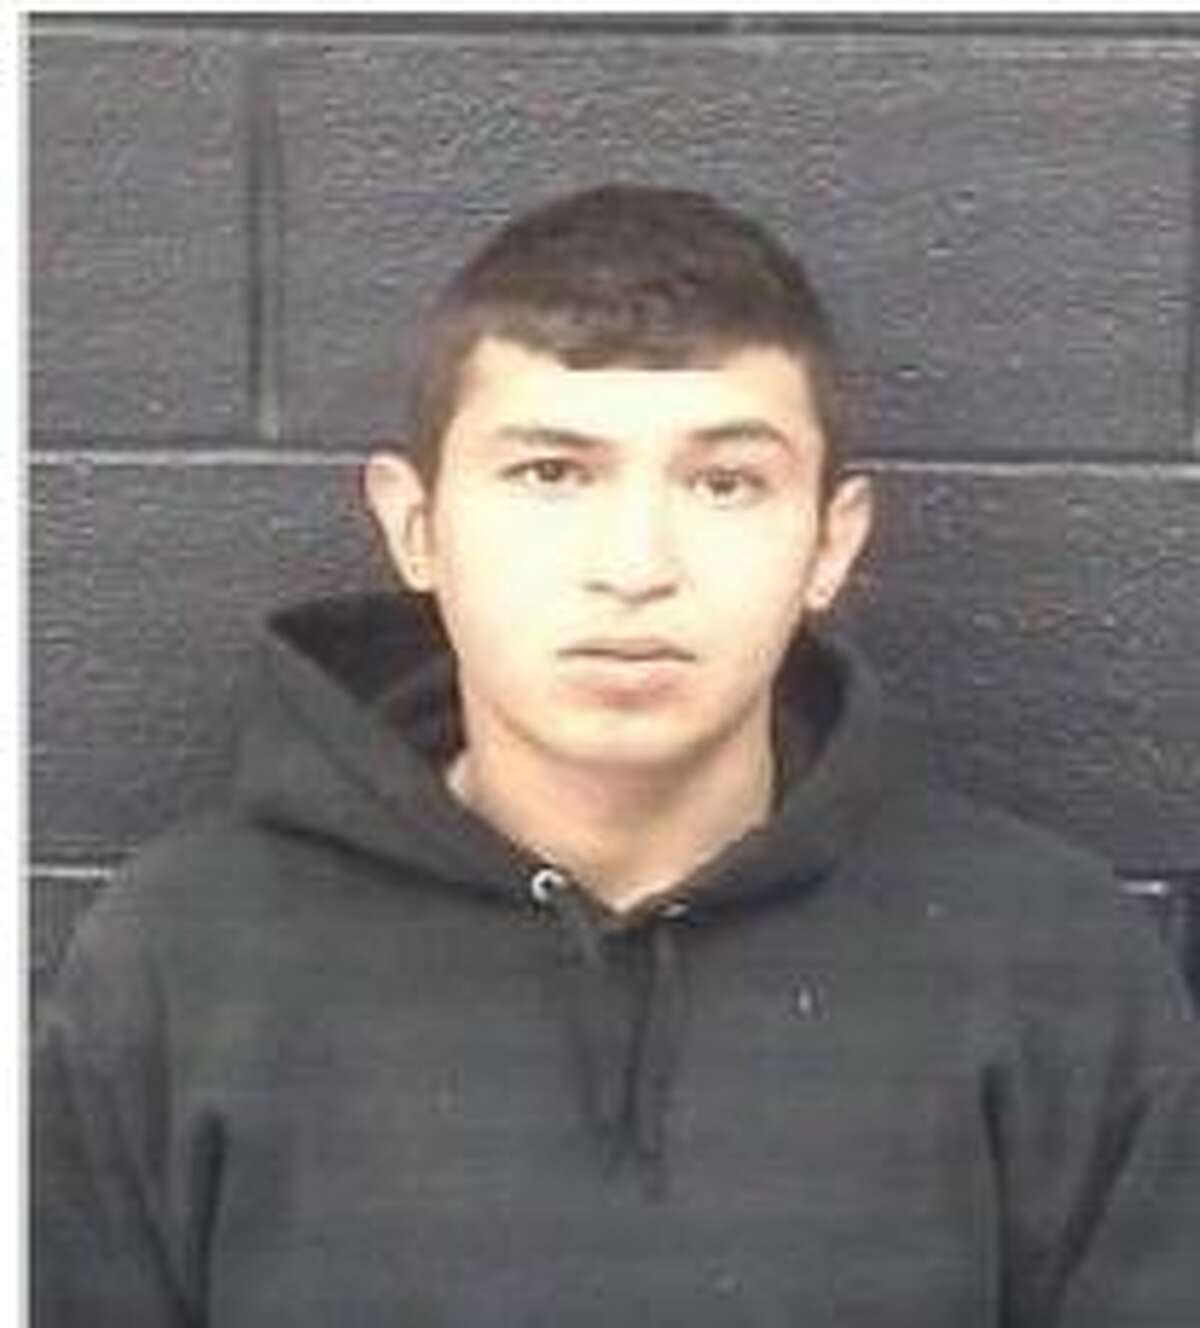 Raul Christian Flores was charged with driving while intoxicated and possession of marijuana.